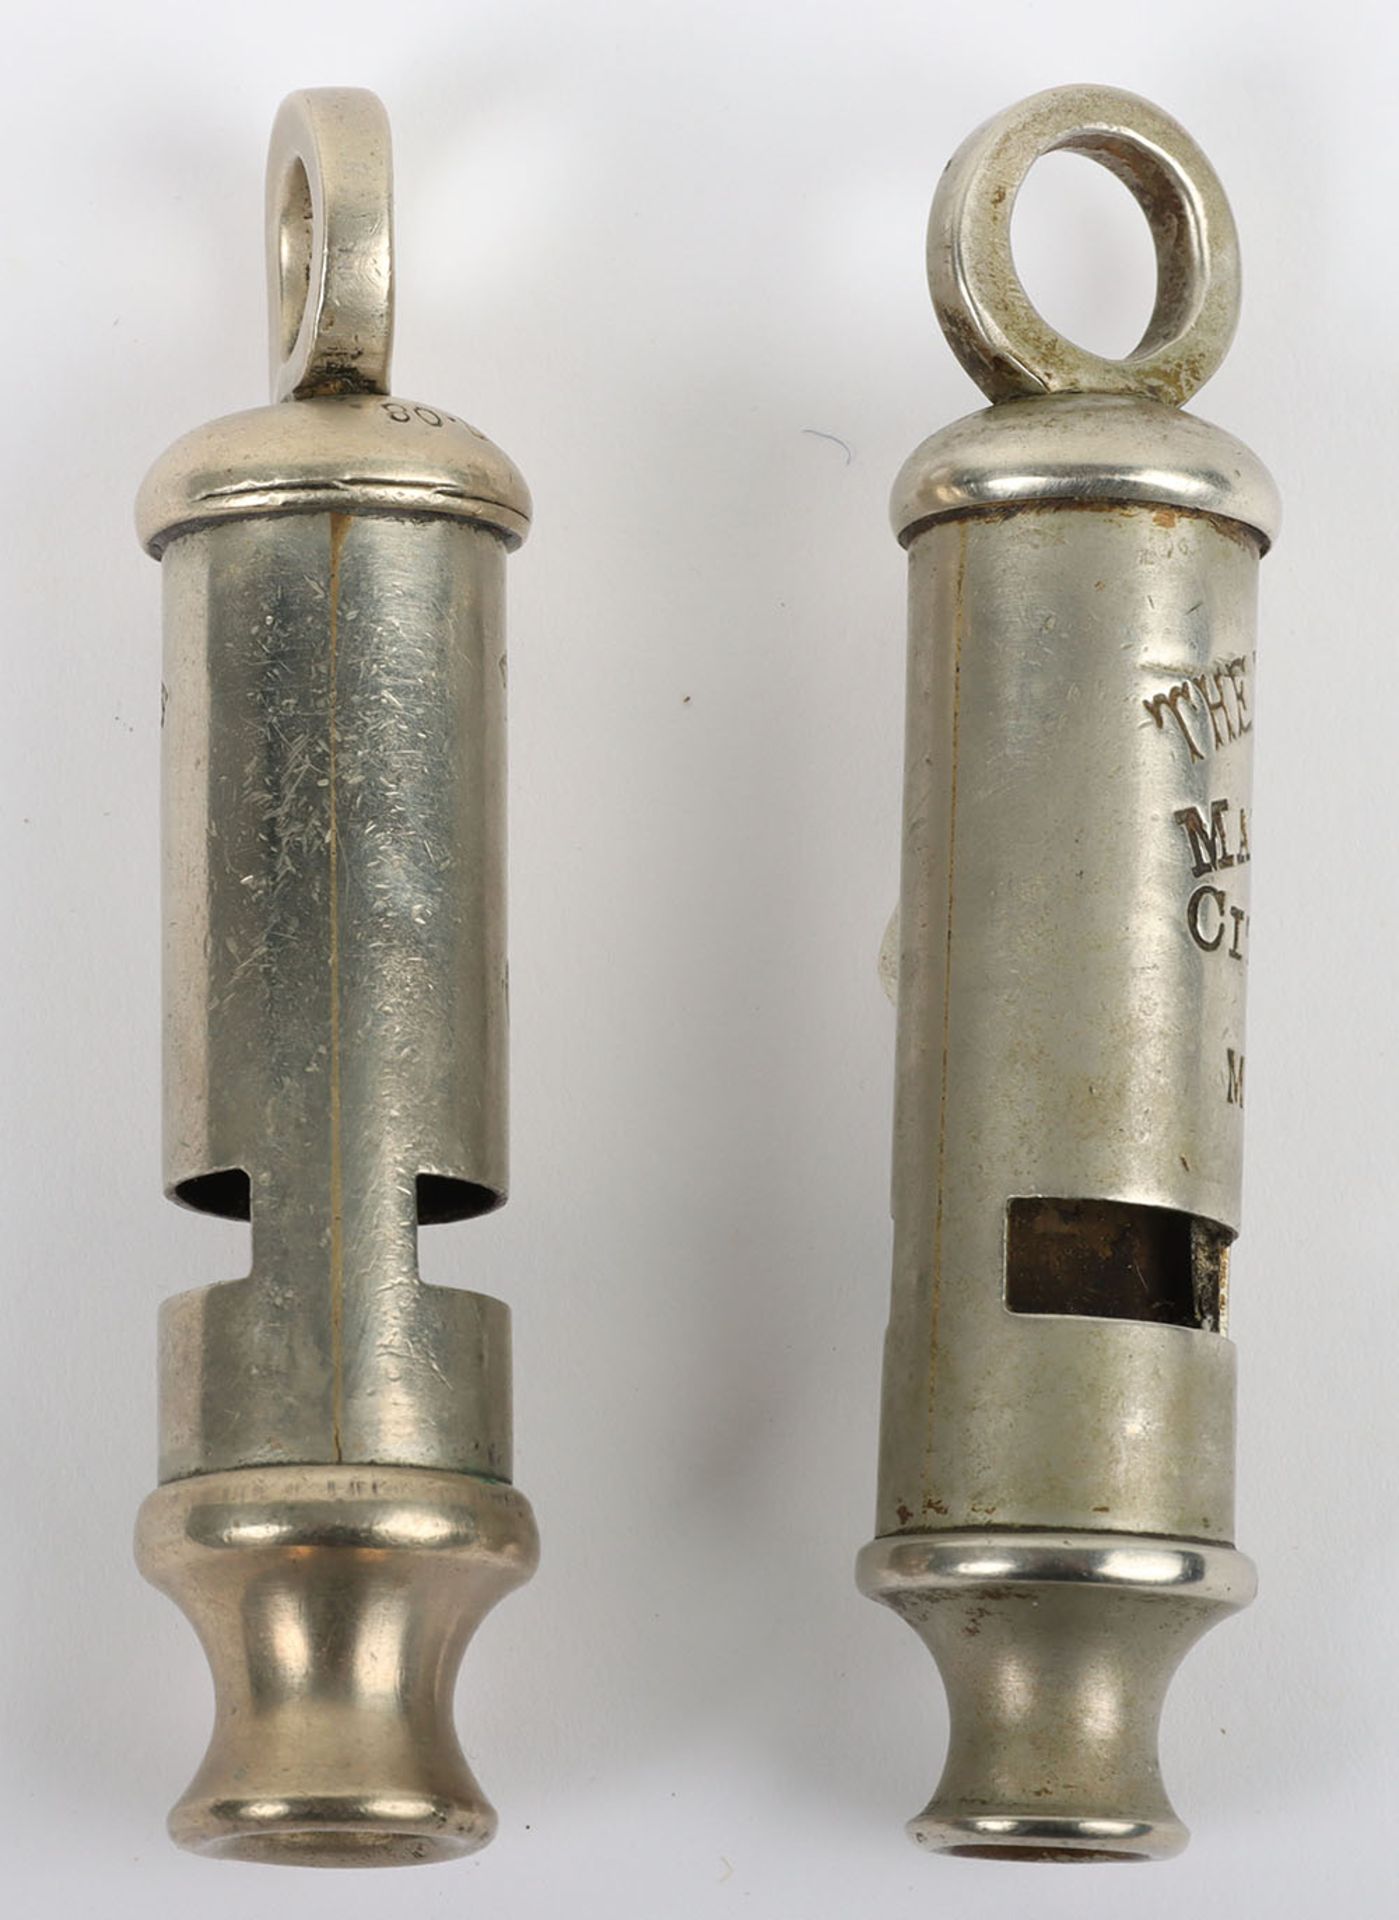 A Manchester City Police whistle - Image 2 of 3